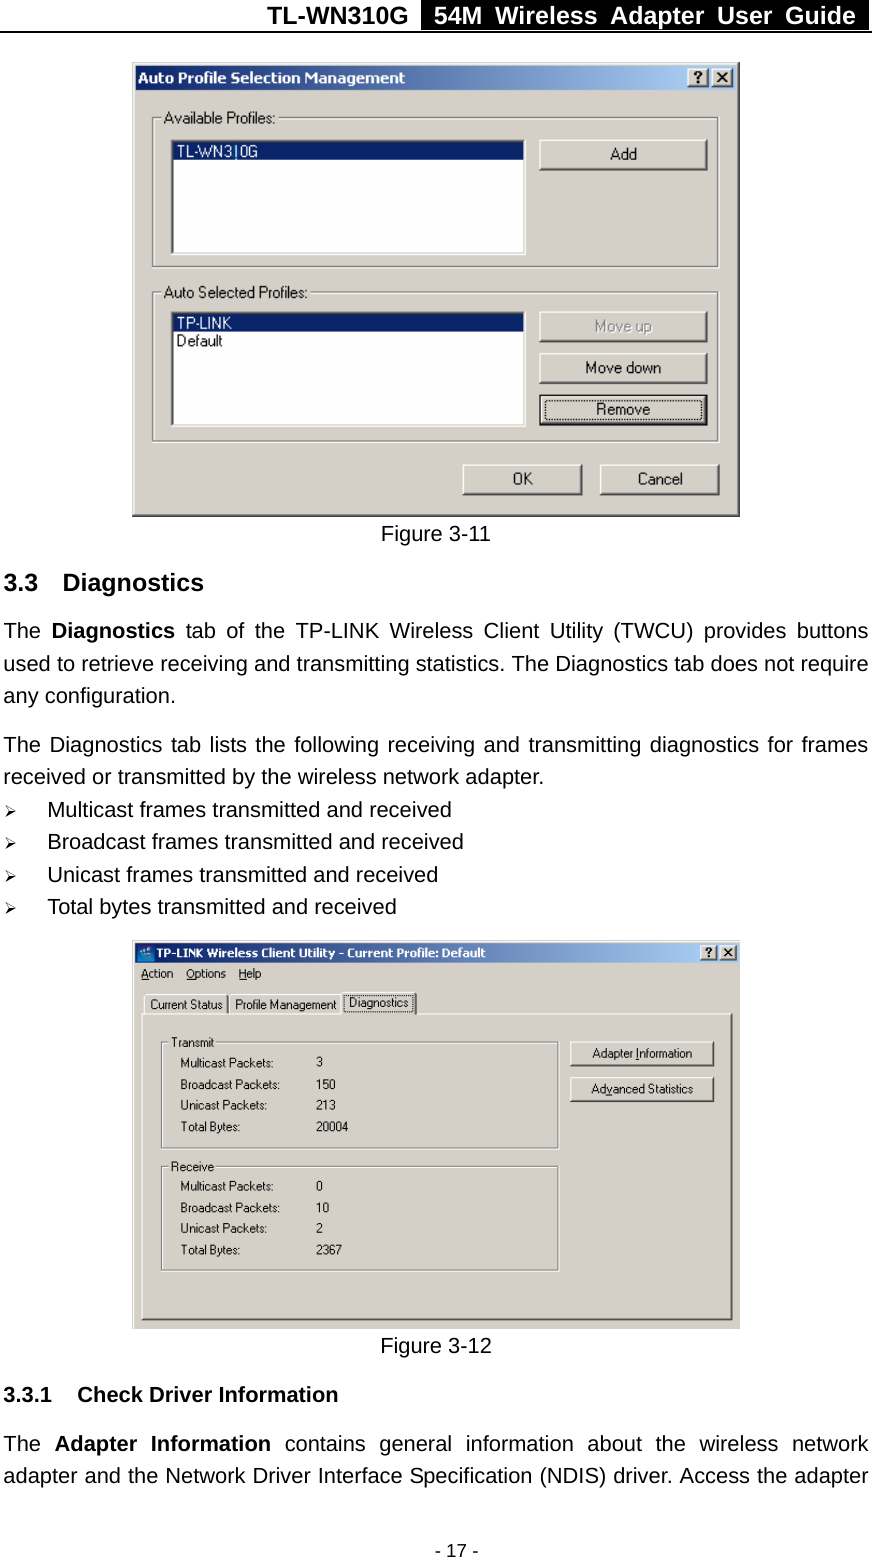 TL-WN310G   54M Wireless Adapter User Guide   - 17 - Figure 3-11 3.3 Diagnostics The  Diagnostics tab of the TP-LINK Wireless Client Utility (TWCU) provides buttons used to retrieve receiving and transmitting statistics. The Diagnostics tab does not require any configuration. The Diagnostics tab lists the following receiving and transmitting diagnostics for frames received or transmitted by the wireless network adapter. ¾ Multicast frames transmitted and received ¾ Broadcast frames transmitted and received ¾ Unicast frames transmitted and received ¾ Total bytes transmitted and received  Figure 3-12   3.3.1  Check Driver Information The  Adapter Information contains general information about the wireless network adapter and the Network Driver Interface Specification (NDIS) driver. Access the adapter 